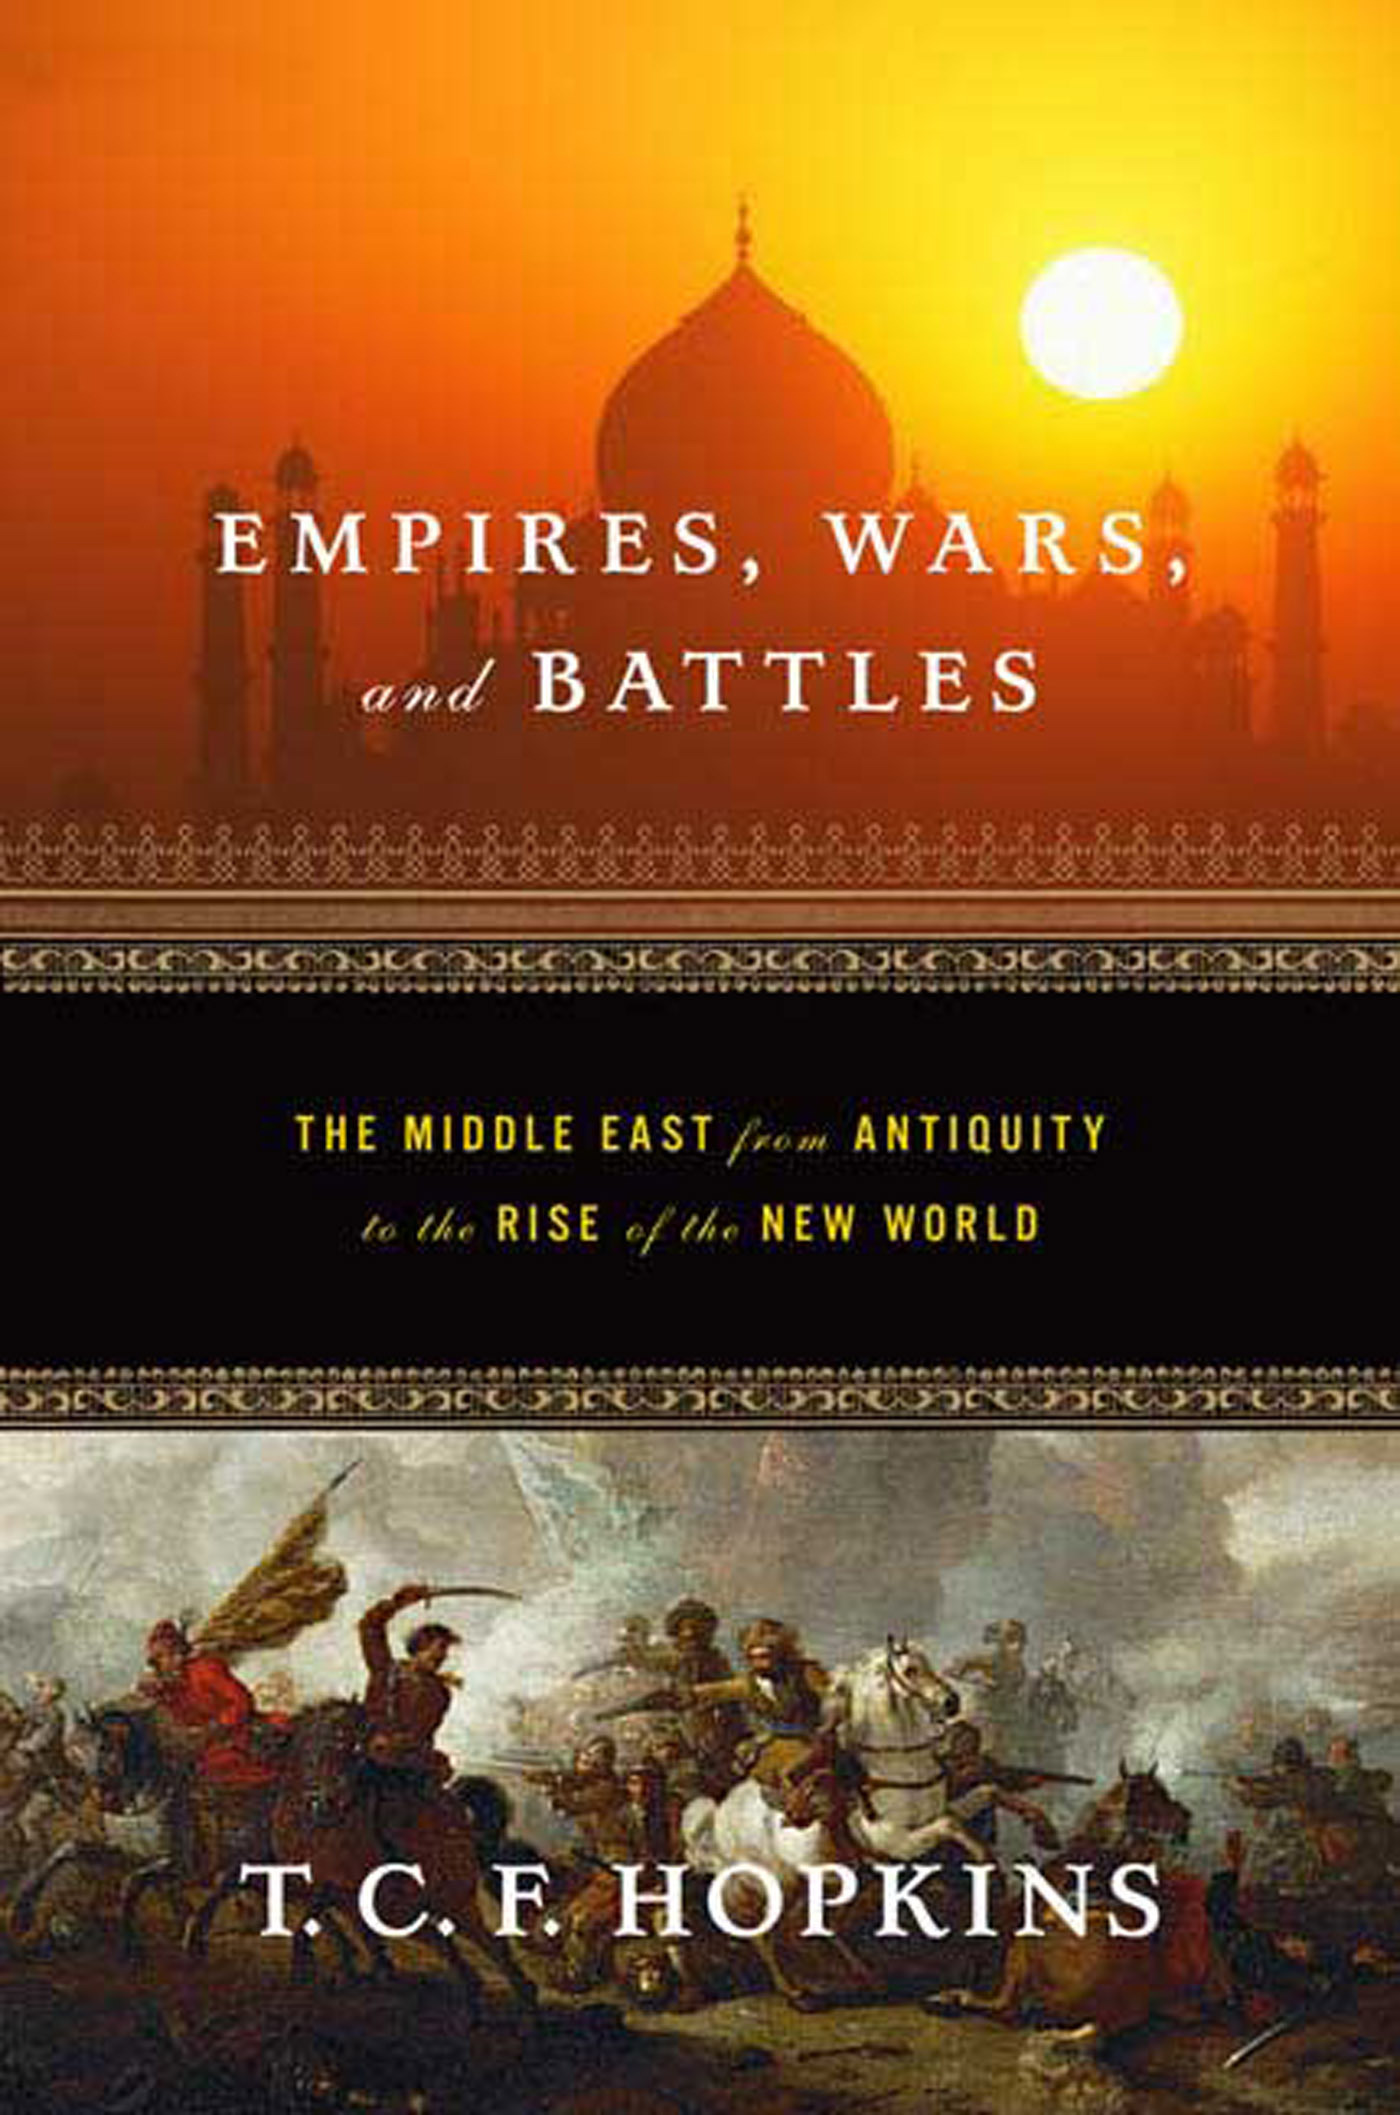 Empires, Wars, and Battles : The Middle East from Antiquity to the Rise of the New World by T. C. F. Hopkins